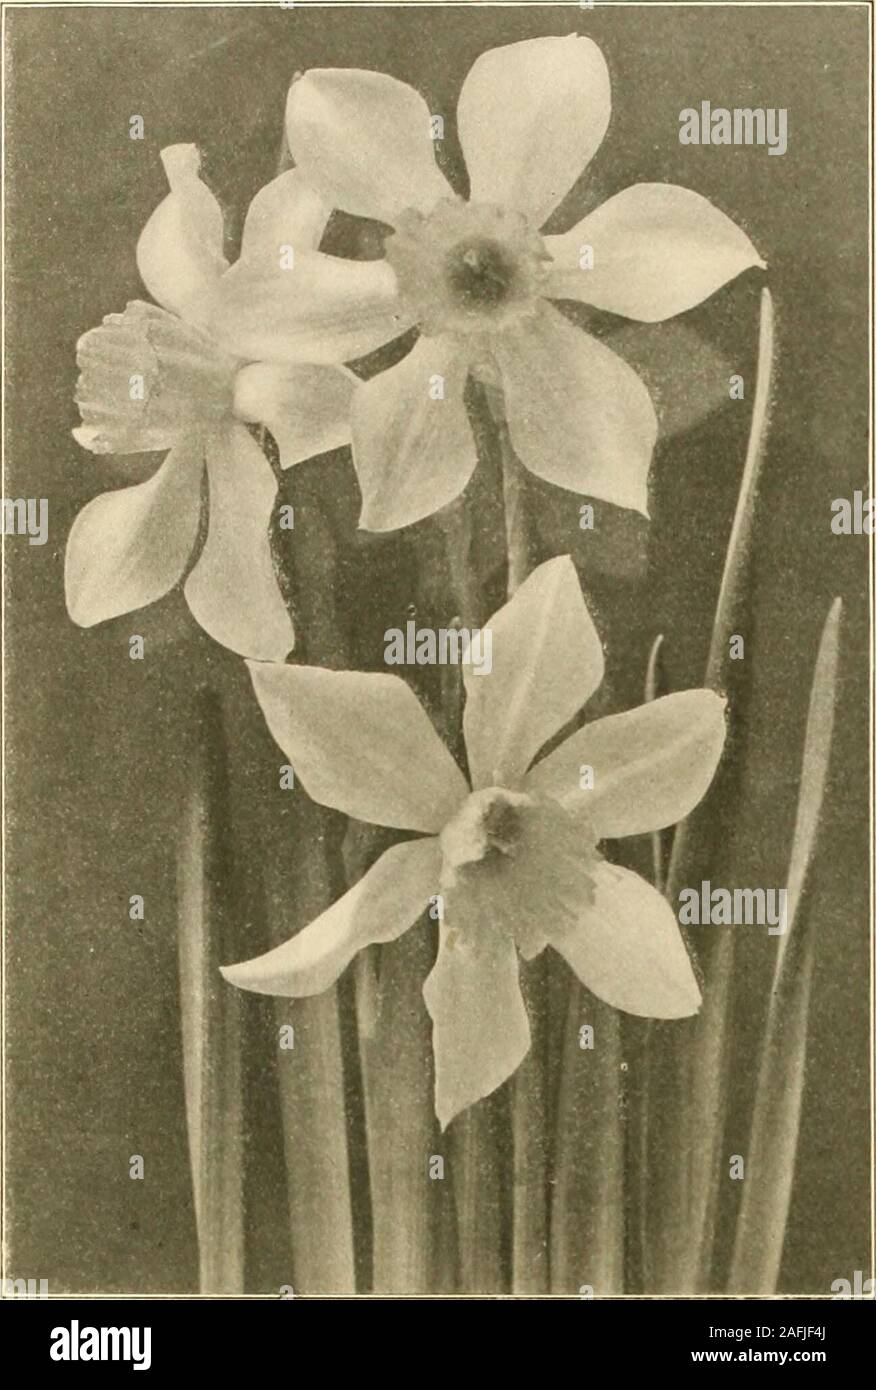 . Farquhar's autumn catalogue : 1913. Naicissus Cyclaminei: Six bulbs of one variety sold at dozen rate; 25 at IOO rate; 250 at IOOO rate. 22. R. & J. FARQUHAR & CO., BOSTON.NARCISSI OR DAFFODLS-Continued. NARCISSUS JONQUILLA OR JONQUILS. The delicately graceful forms, delicious fragrance, and deep yellowcolor of their blossoms have made the Jonquils favorites of the amateurand necessities with the florist. They are easily forced, and if startedearly, may be flowered by Christmas, or even earlier. Plant six oreight bulbs in a six-inch bulb pan, covering the crowns half an inch,and treat them Stock Photo